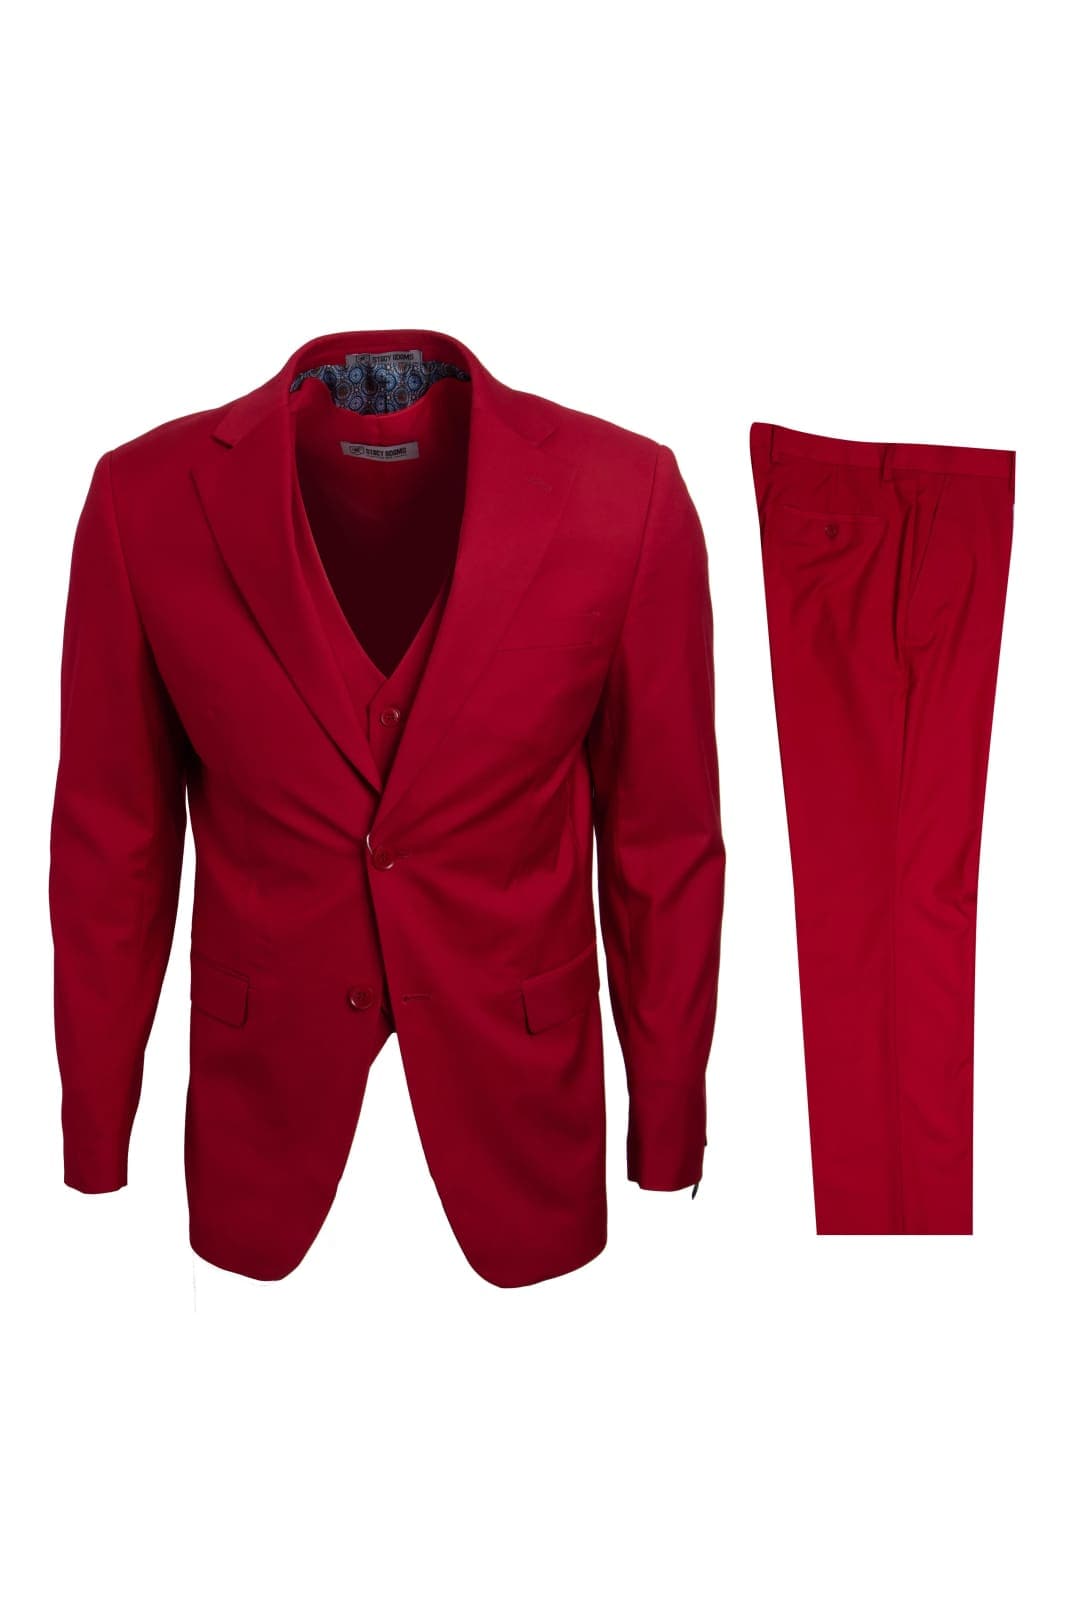 Red Stacy Adams Men’s Suit - Red / 34R / SM282H1-10 - Mens-suits